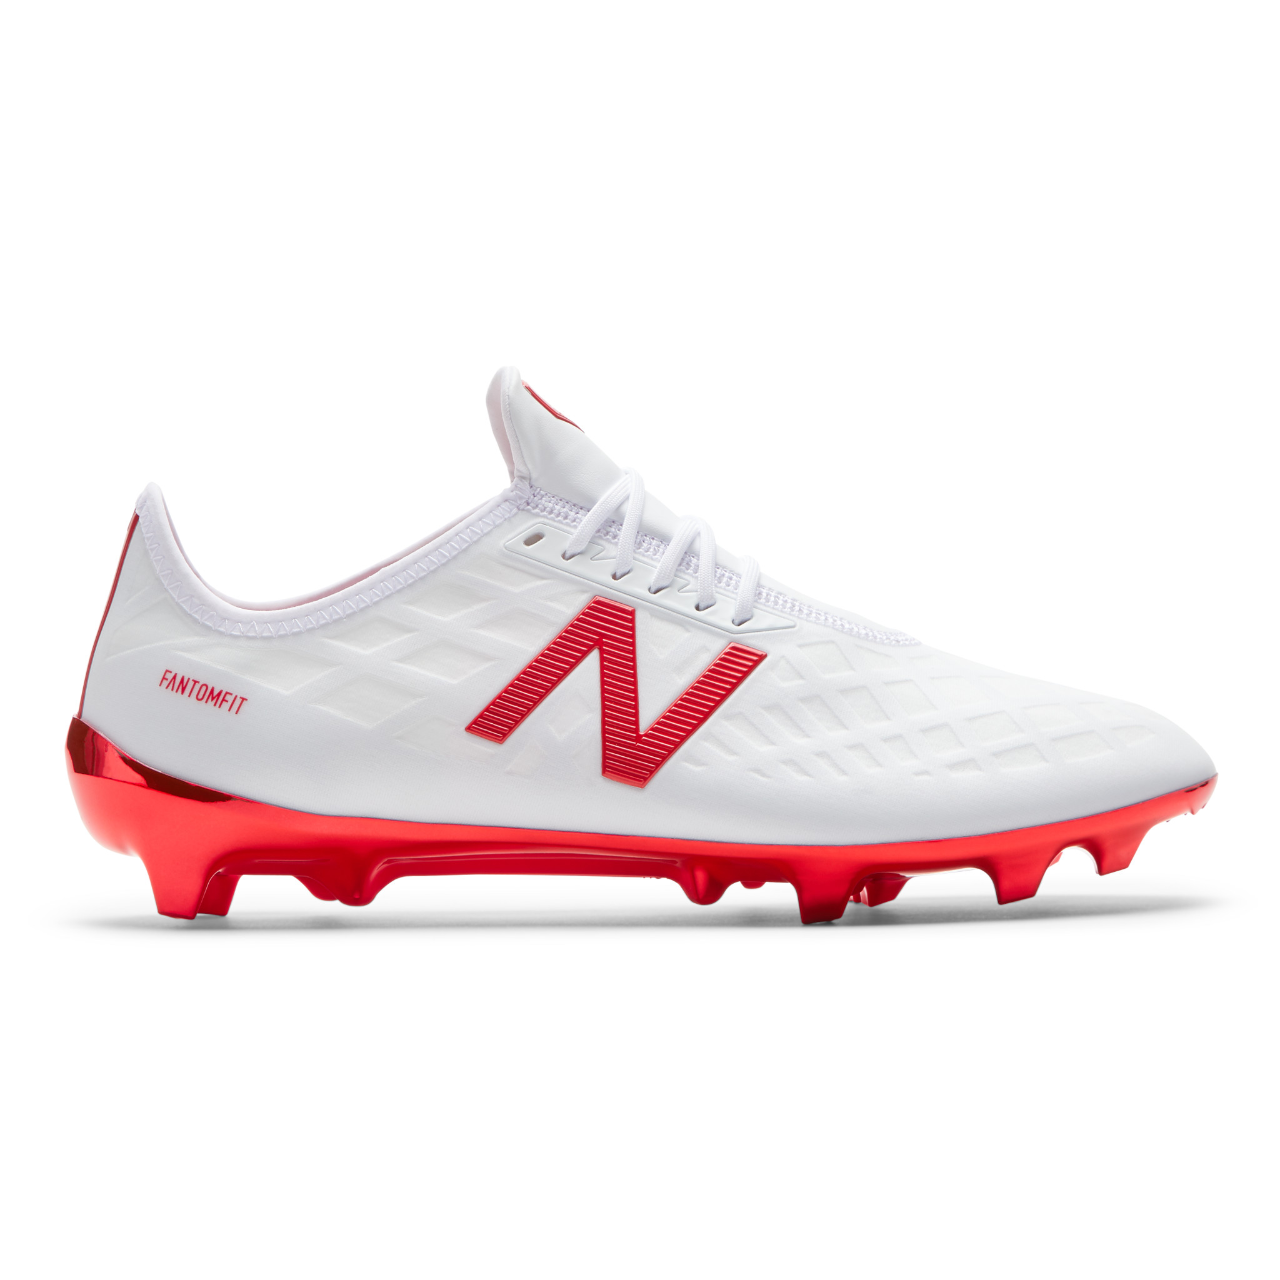 New Balance Furon 4.0 Pro Fg (WIDE) Soccer Boots - White/Flame